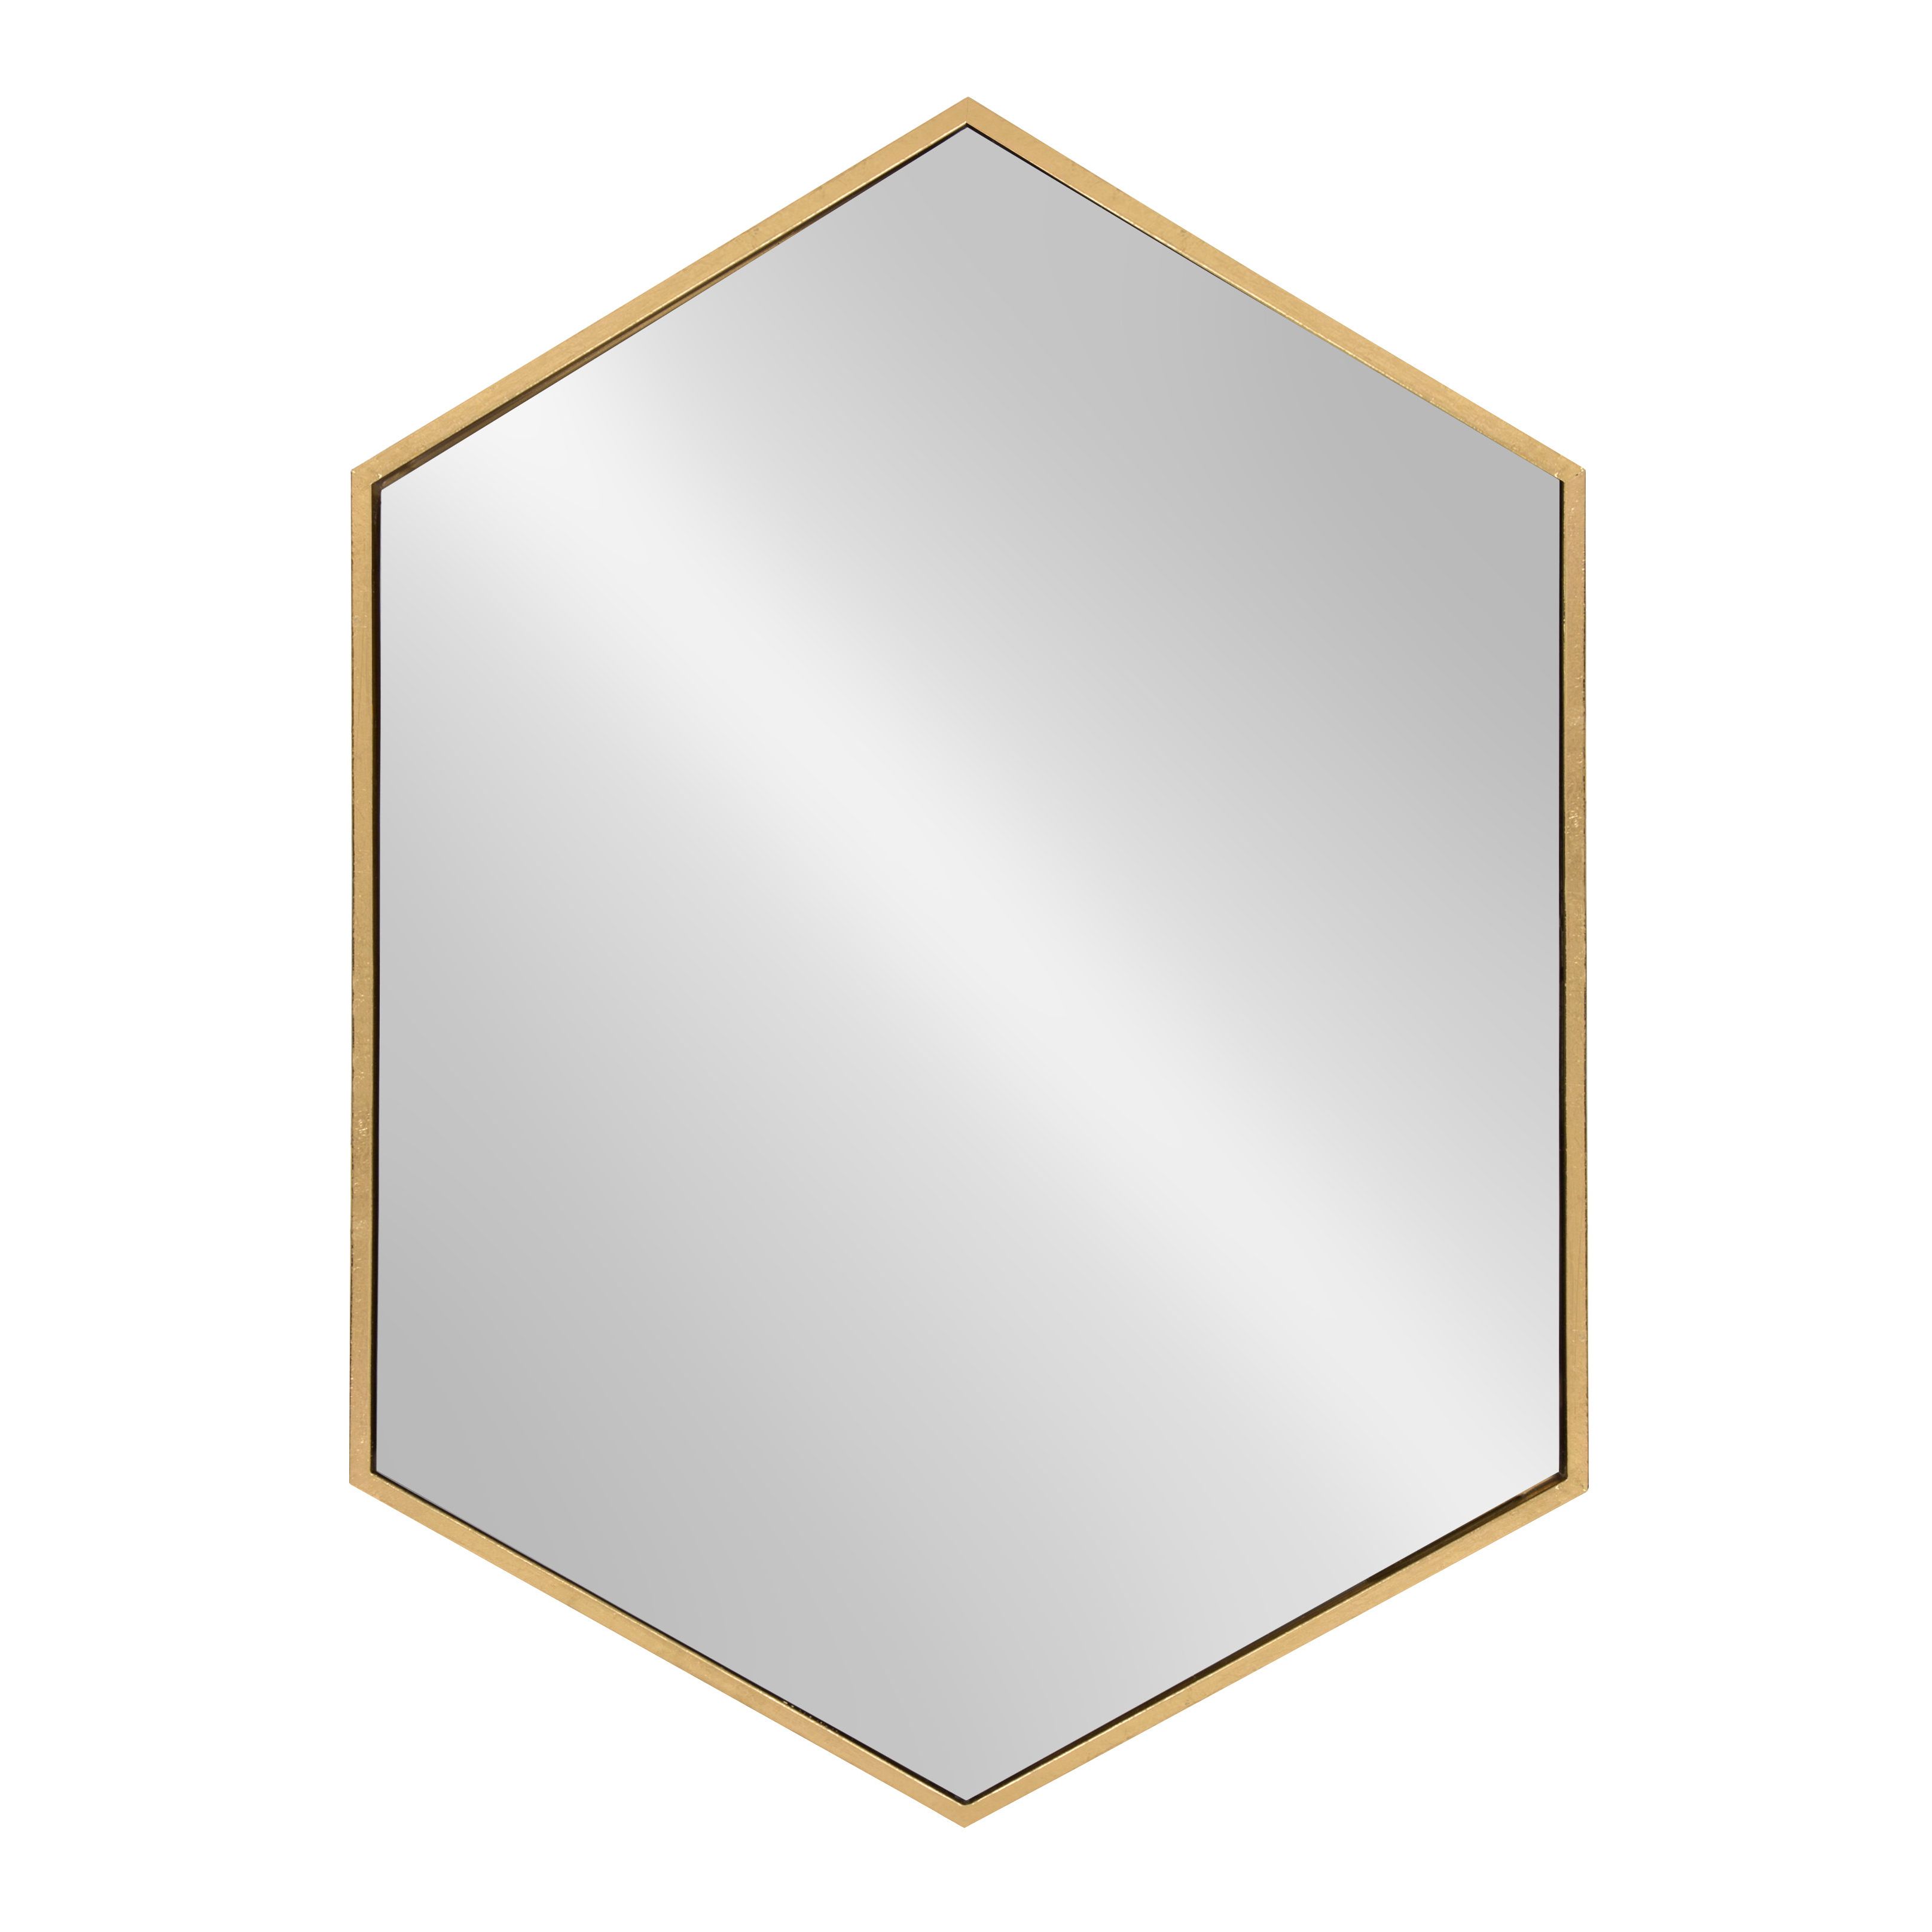 Hentz Hexagon Wall Mirror Intended For Best And Newest Hexagon Wall Mirrors (View 17 of 20)